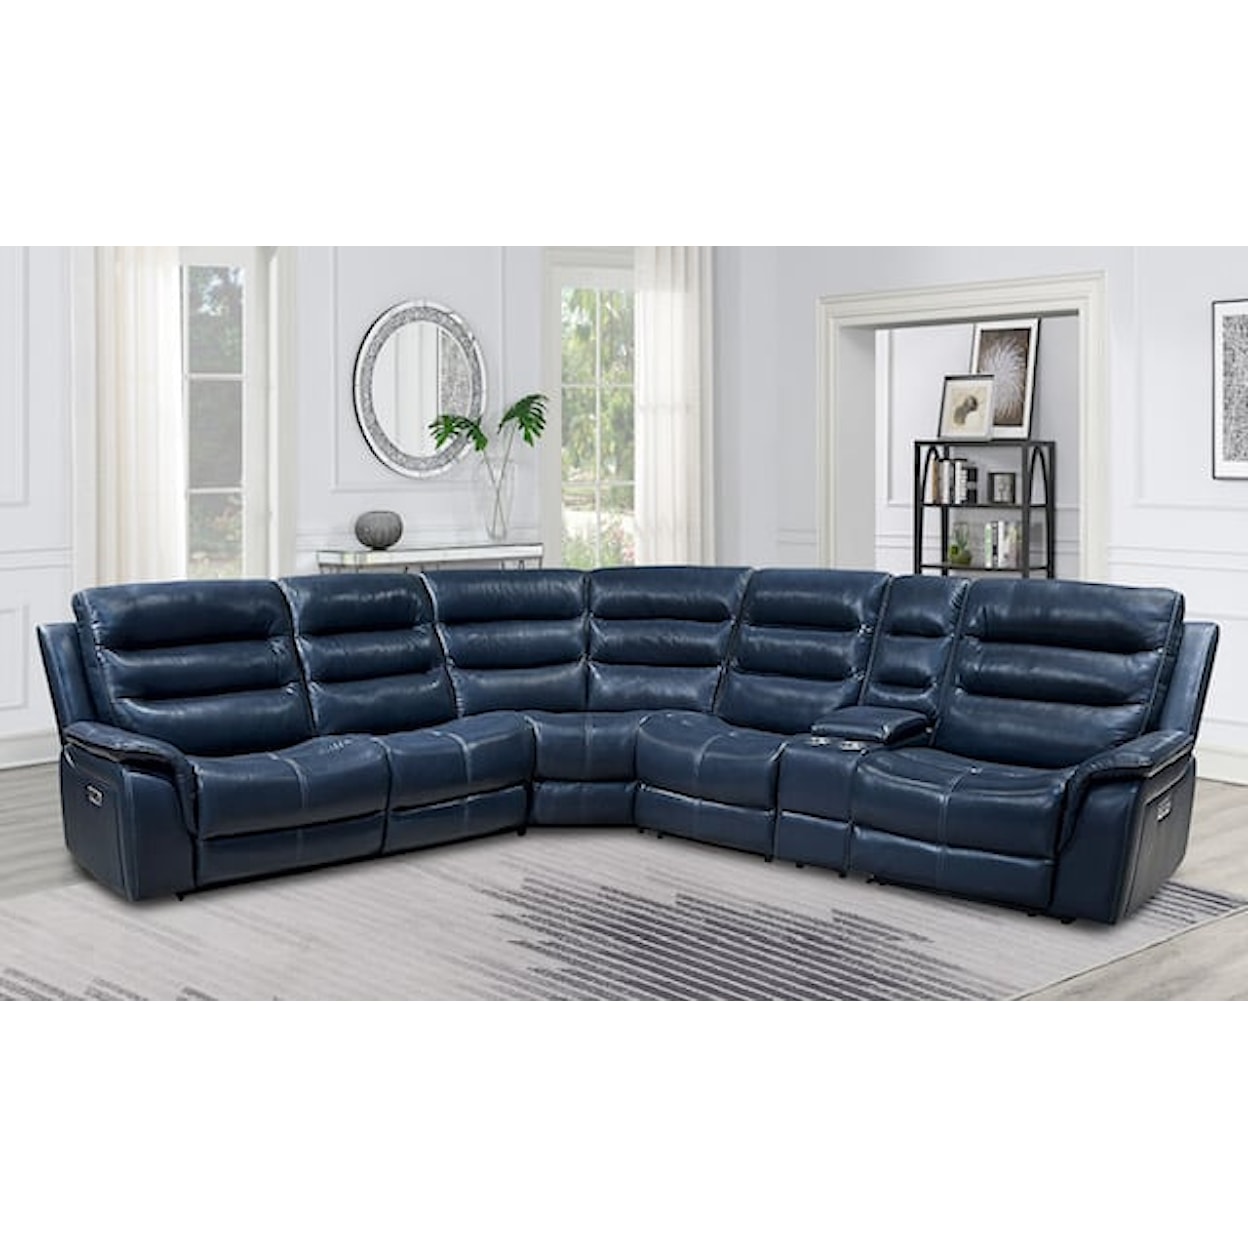 Lifestyle U8153S Leather Sectional U8153S Ocean Leather Sectional